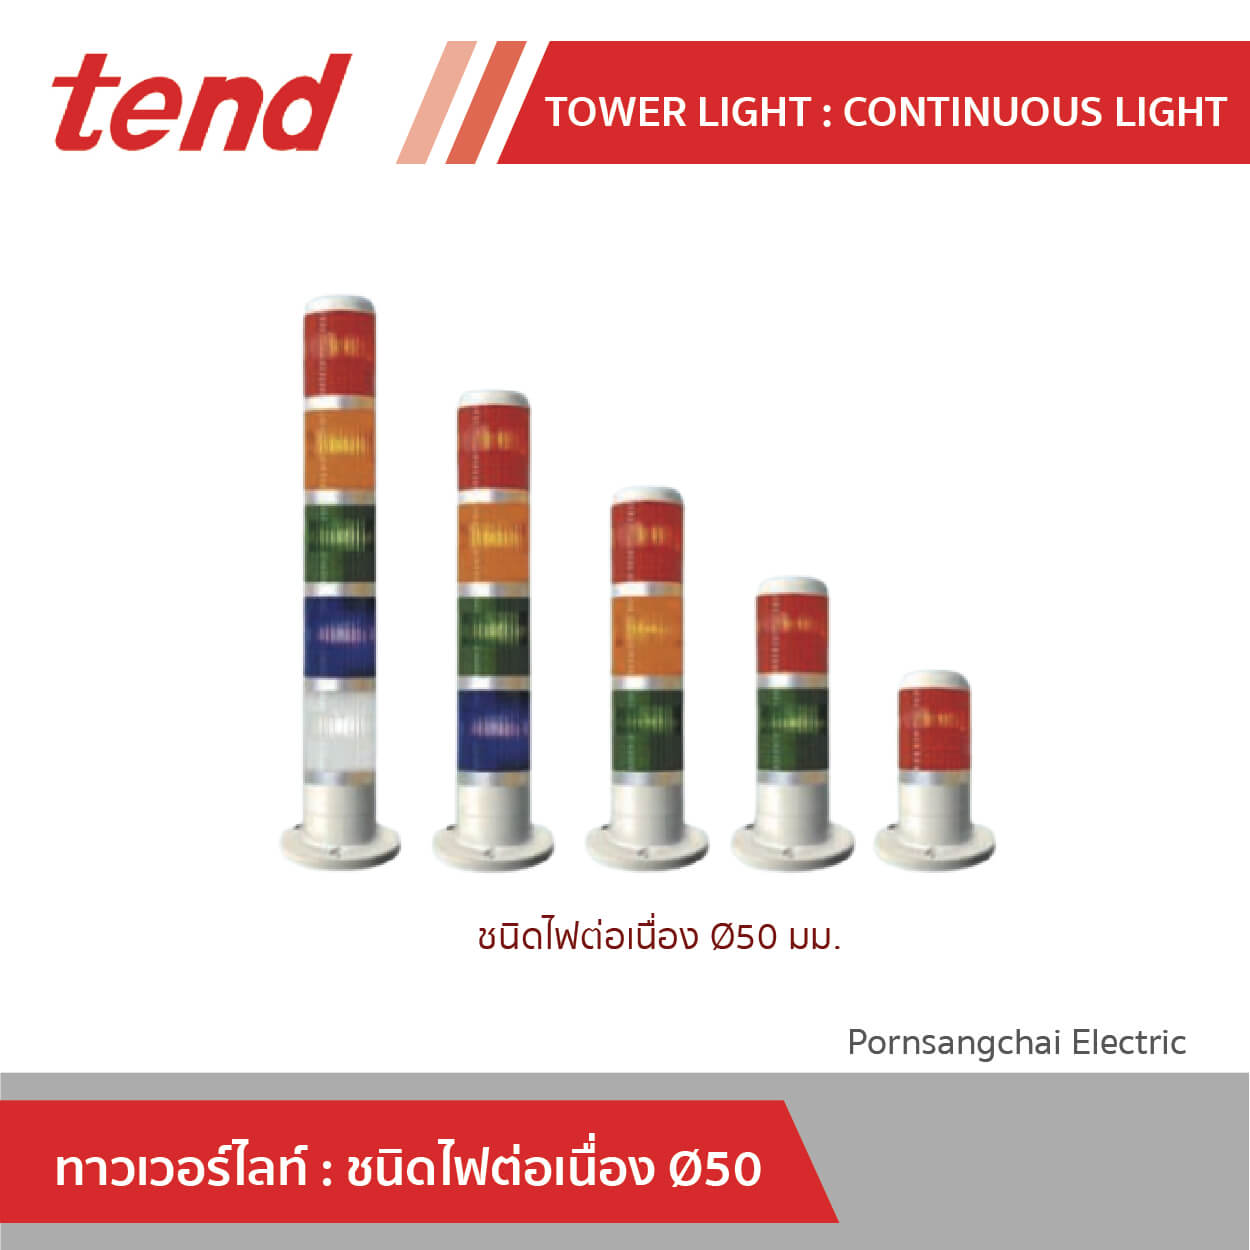 tend Tower Light : Continuous Light